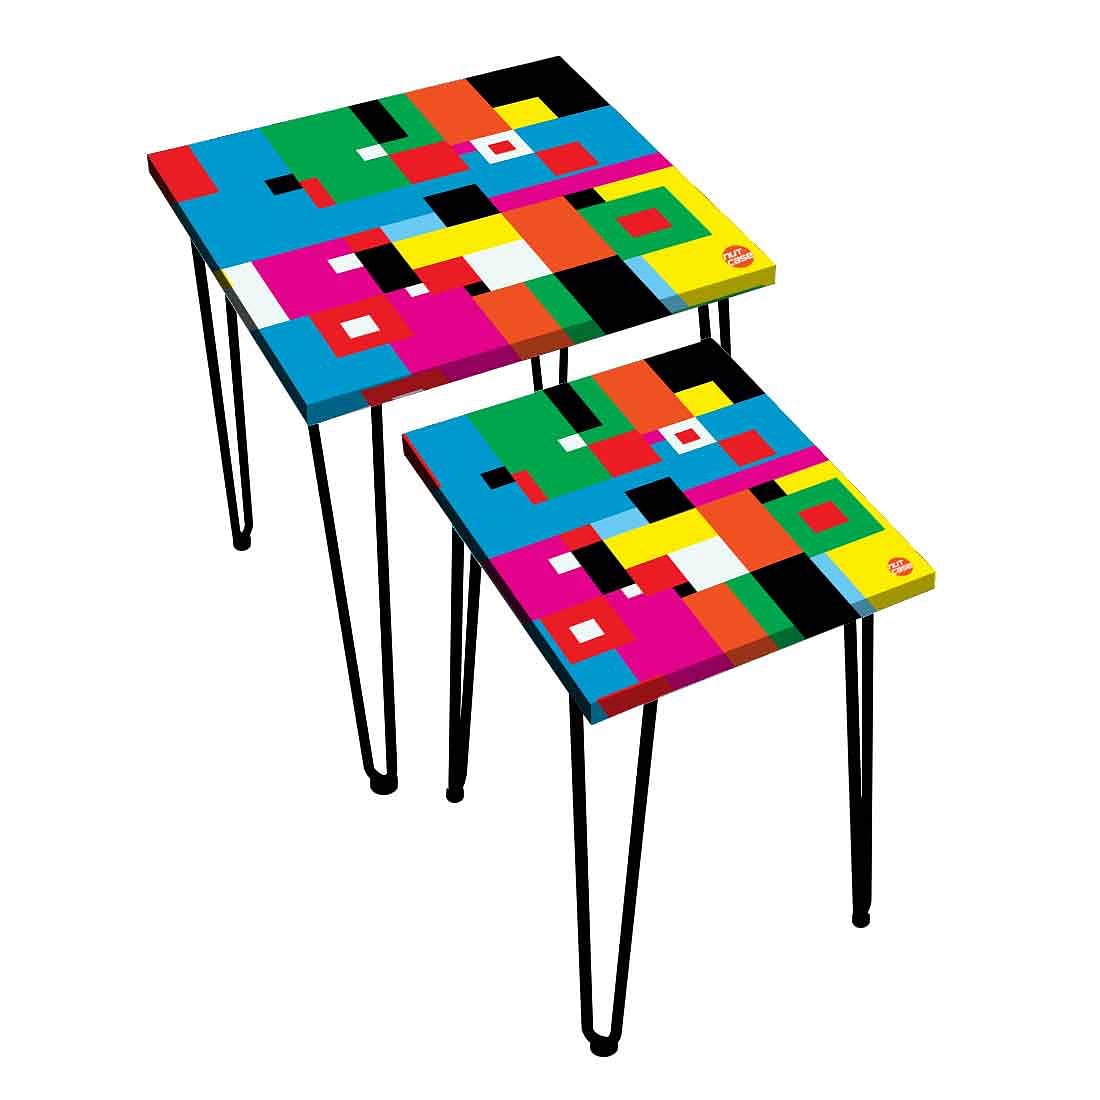 Large & Small Sized Set of 2 Nesting Table for living Room - Colorful Pattern Nutcase